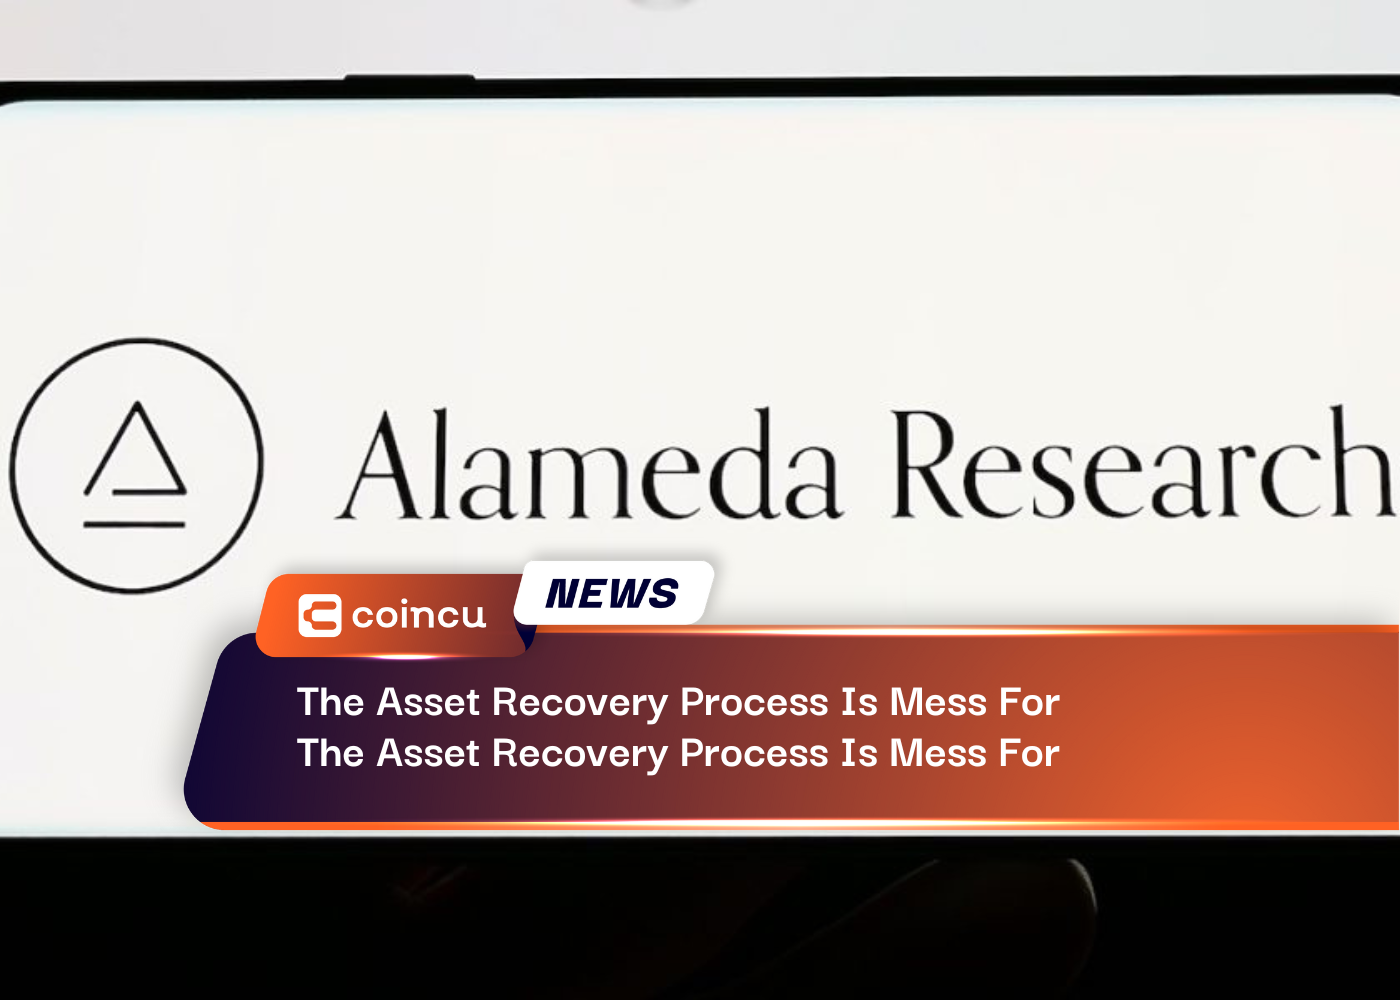 The Asset Recovery Process Is Mess For